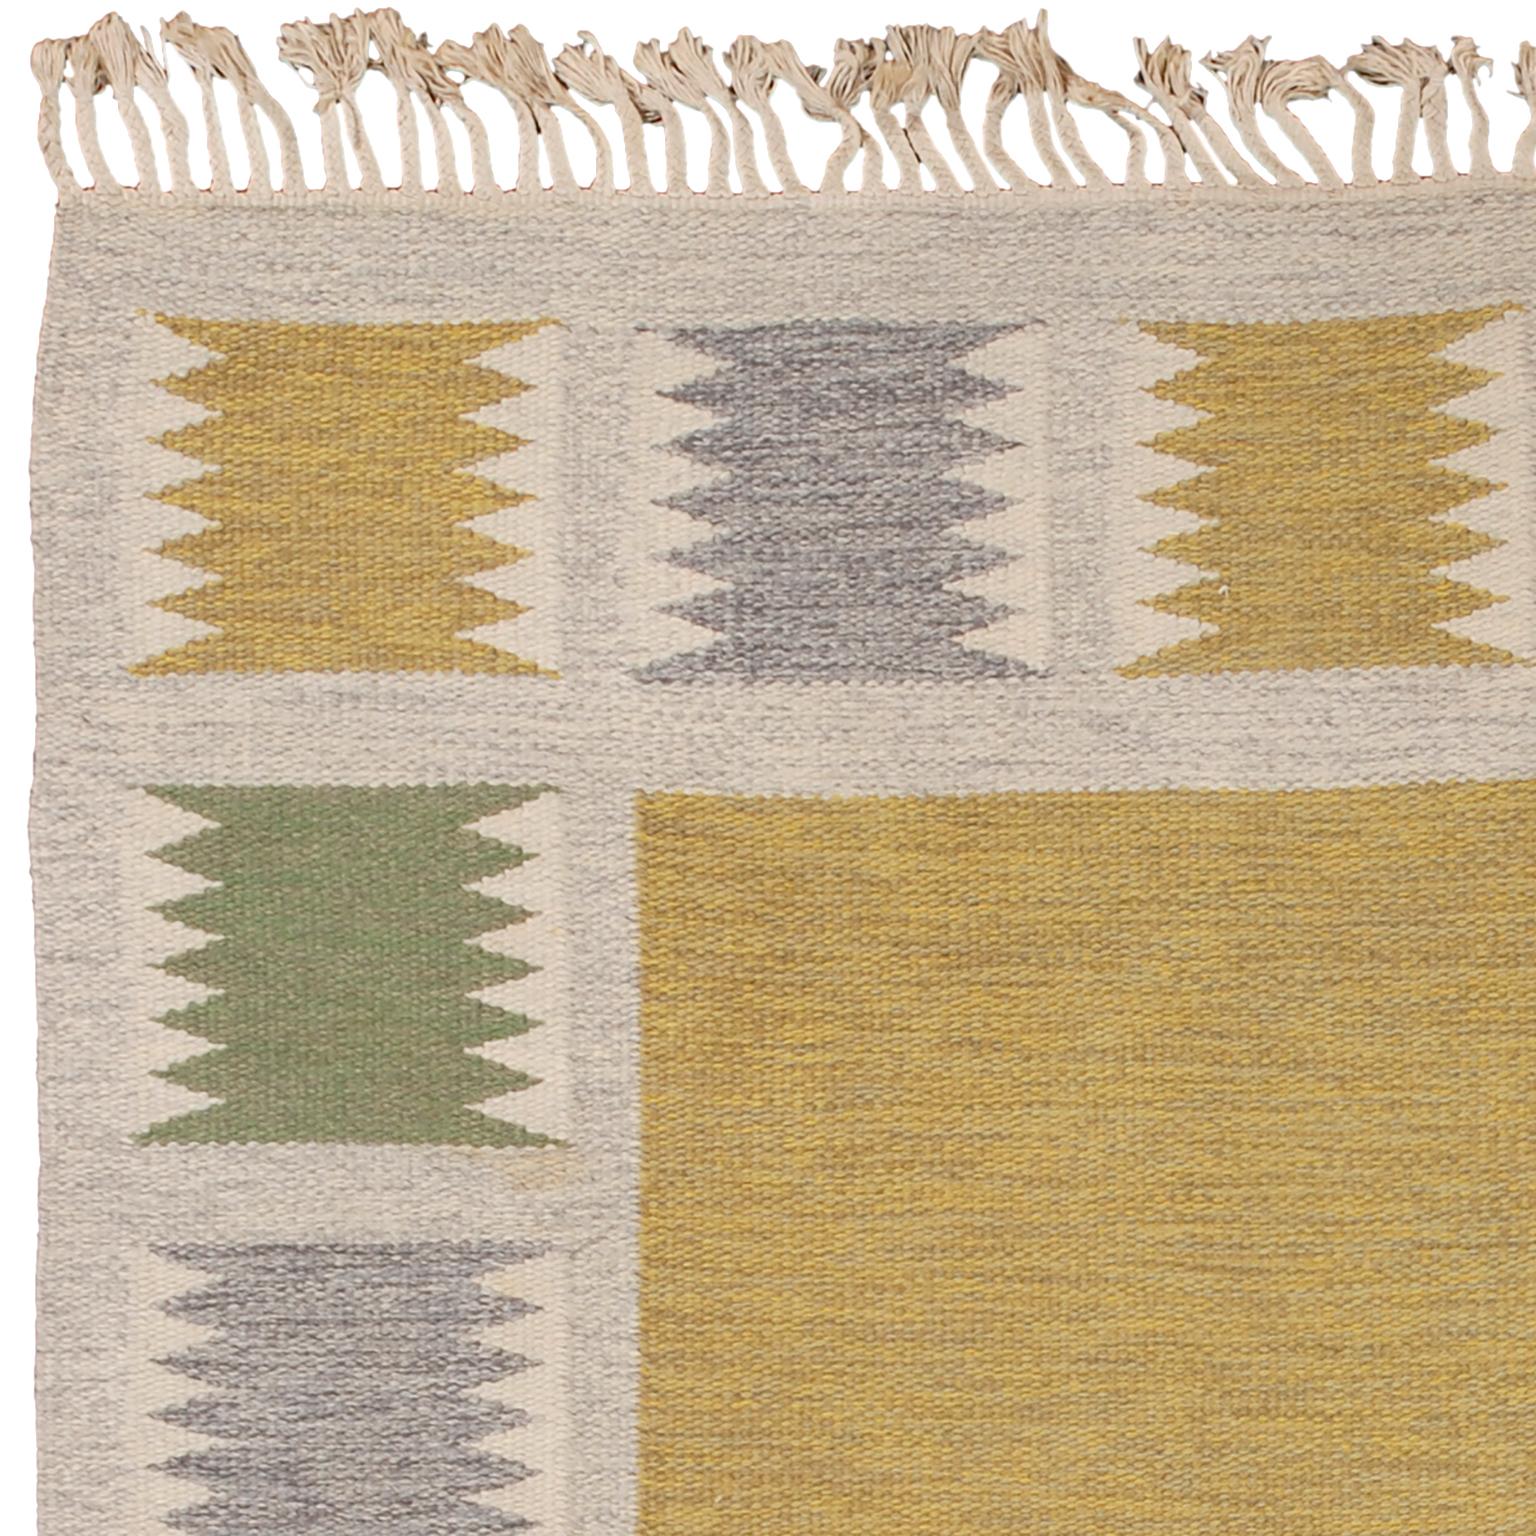 Mid 20th Century Swedish Flat-Weave Rug by Birgitta Sodergren In Good Condition For Sale In New York, NY